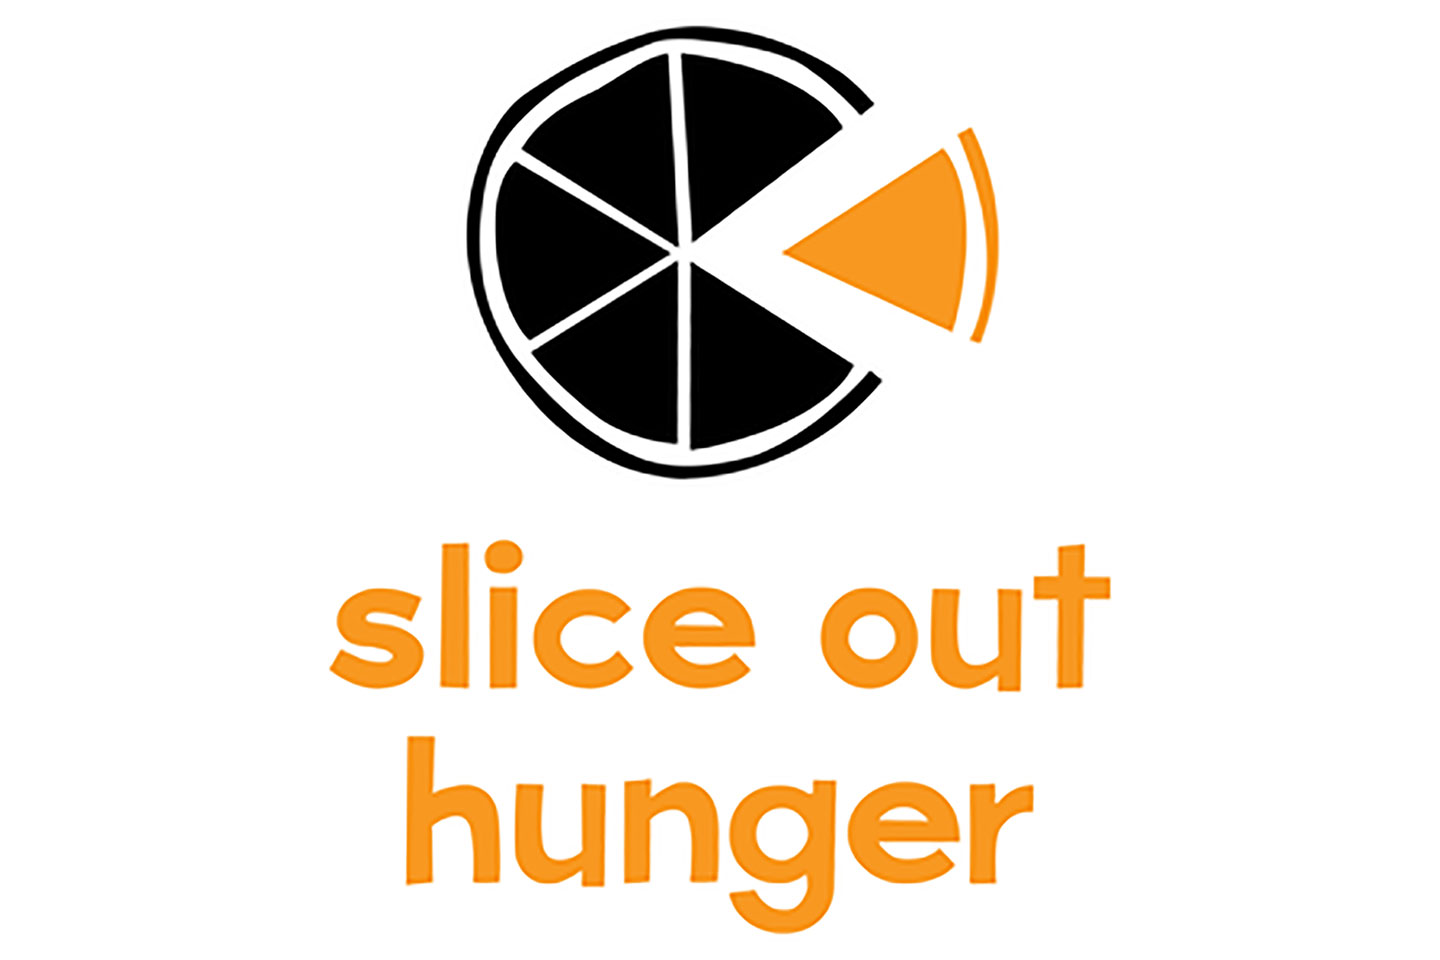 Our Pie-It-Forward program sends pizza to shelters and soup kitchens across the U.S.
https://sliceouthunger.org